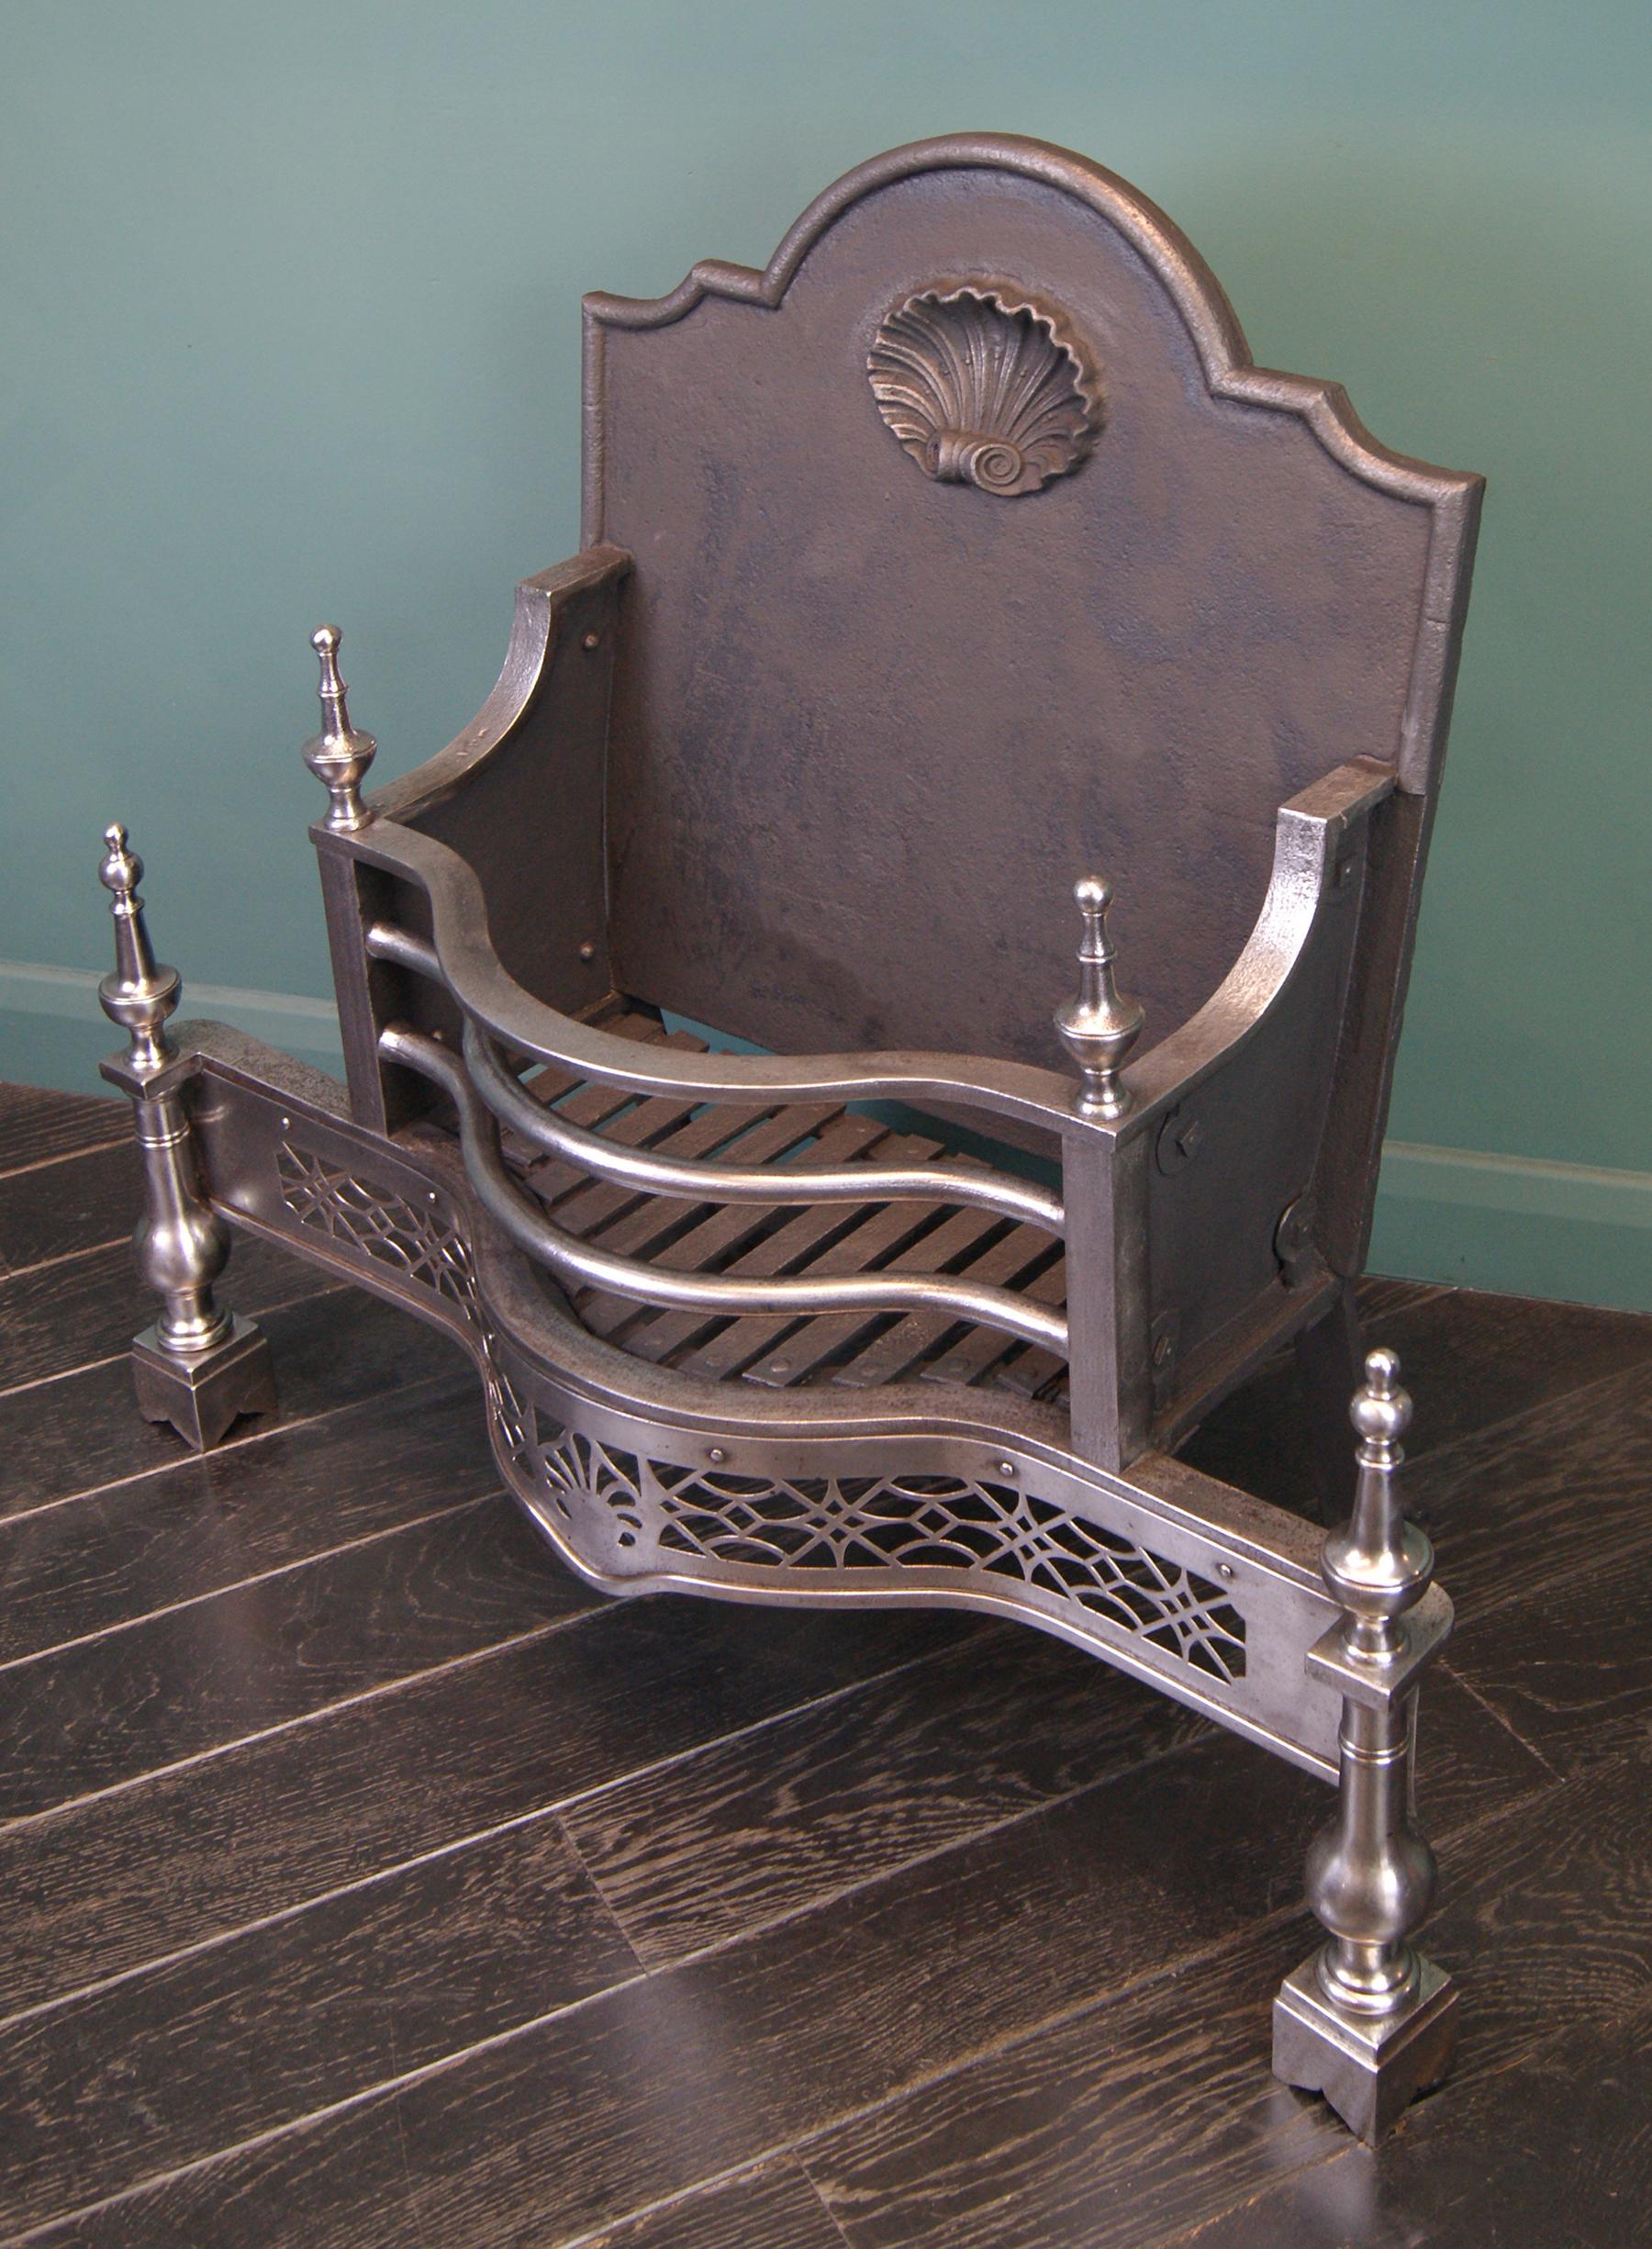 A fine 19th century English polished steel dog grate with centred circular front. A shaped deep openwork apron, with turned legs on plinths and urn finials uppermost. Restored. Central shell motif to shaped cast iron fire back. Restored.
Circa